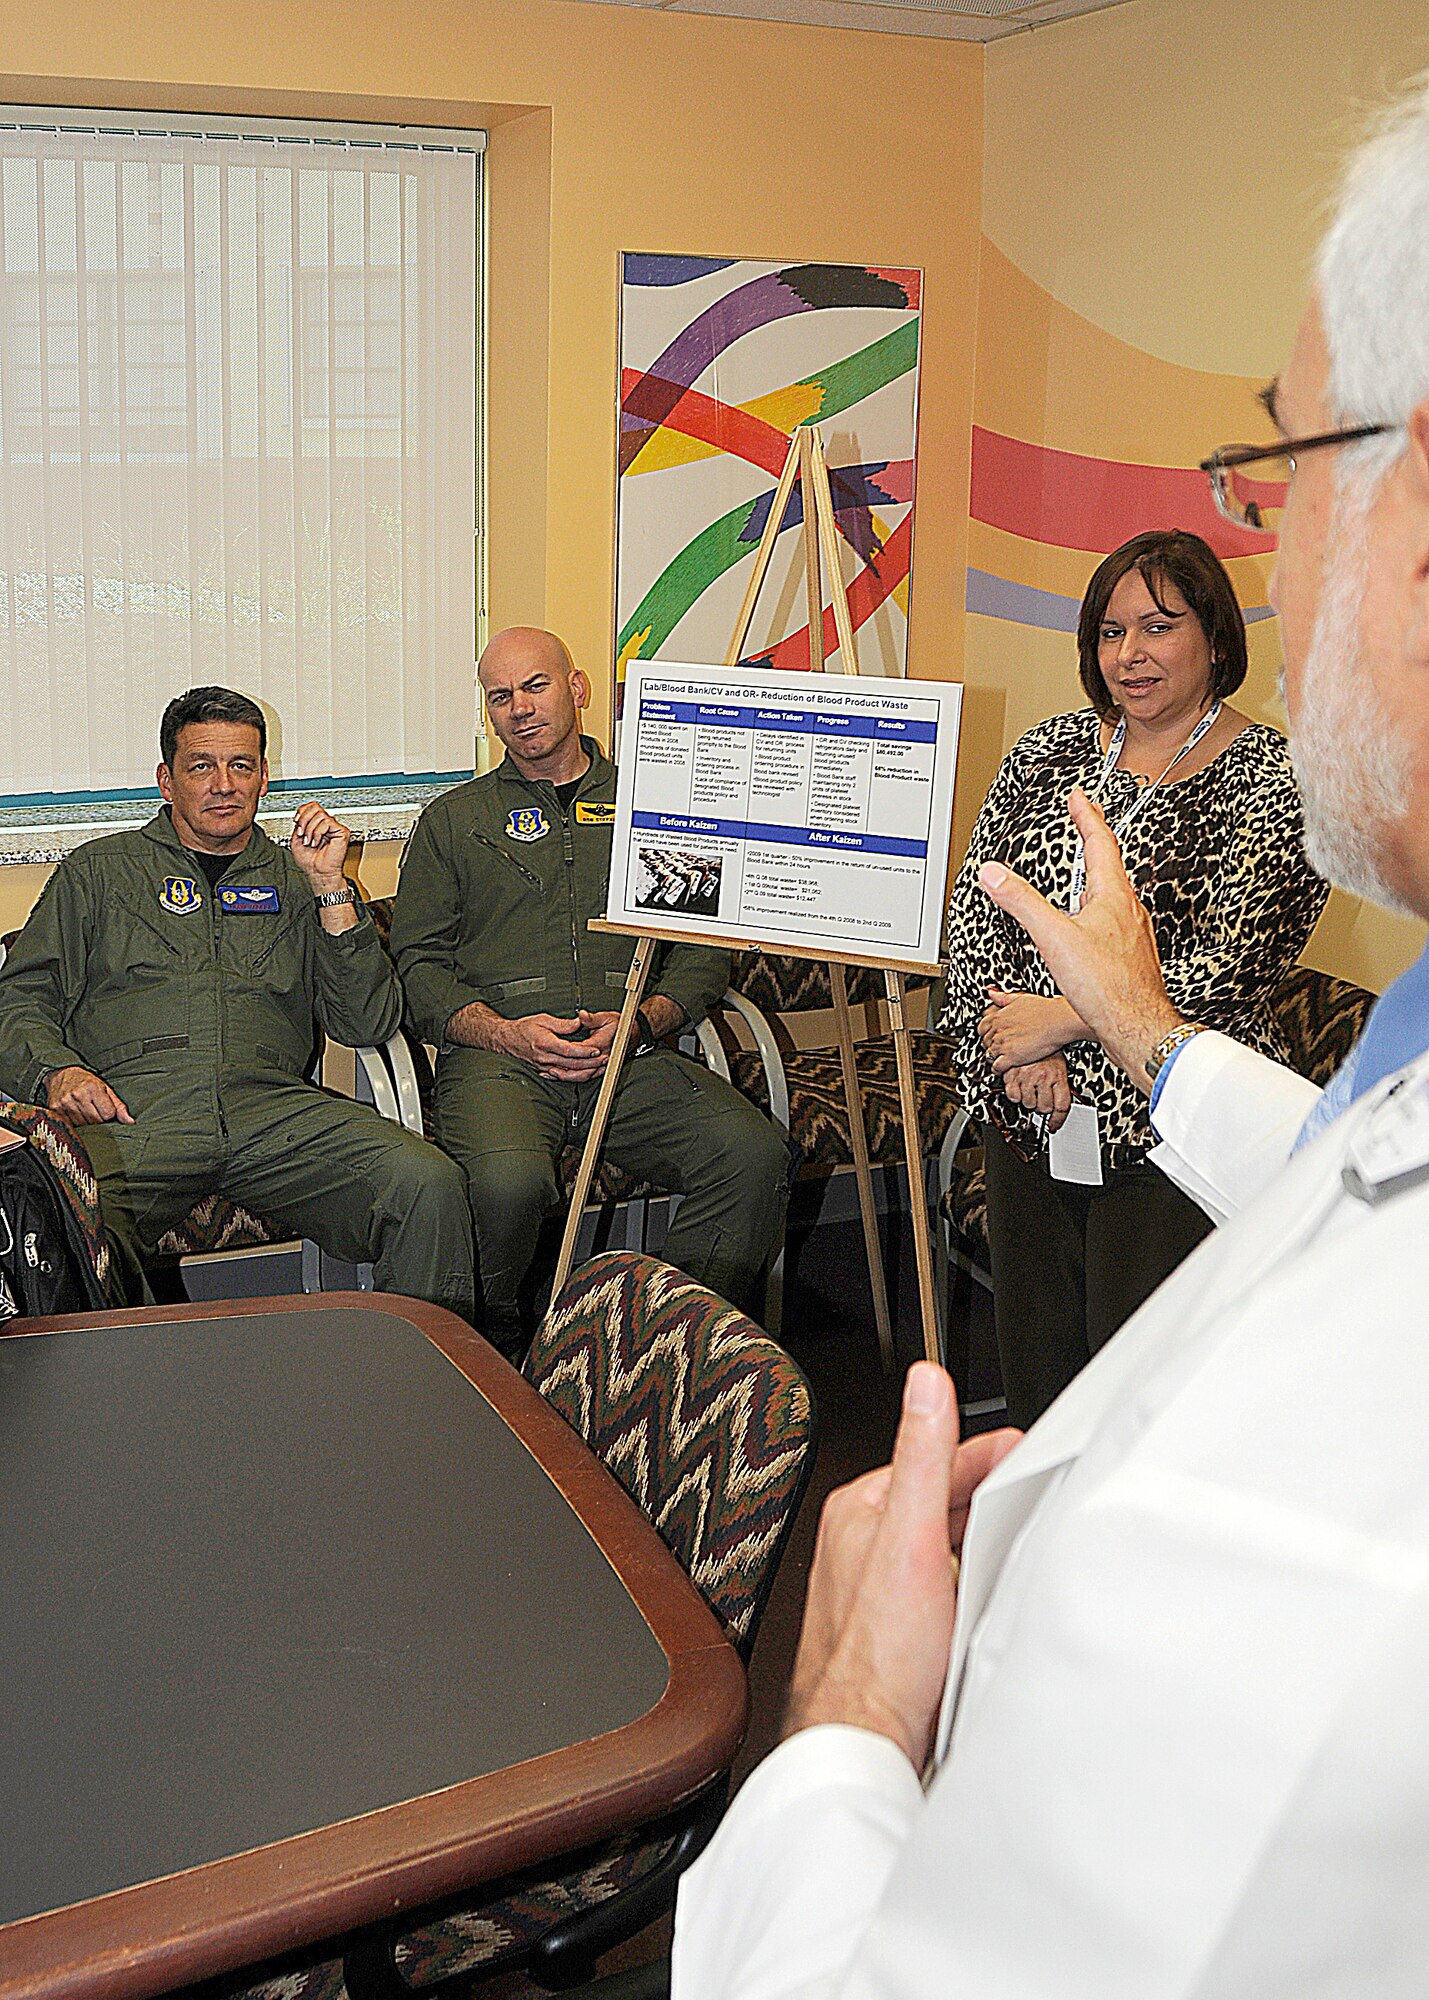 Dr Steven J. Melnick, Chief Department of Pathology and Clinical Laboratories at the Miami Children's Hospital  addresses Major General Frank J. Padilla, 10th Air Force Commander, during a tour focused on the hospital's implementation of the Lean system, a managerial process designed to help identify waste. 28 Commanders from 10th Air Force participated in a two day seminar on the Lean system at  Homestead Air Reserve Base and Children's Hospital, Aug 10-11, in order to gain skills for implementing cuts that require the Air Force as a whole to abide by within the 2016 deadline. 
